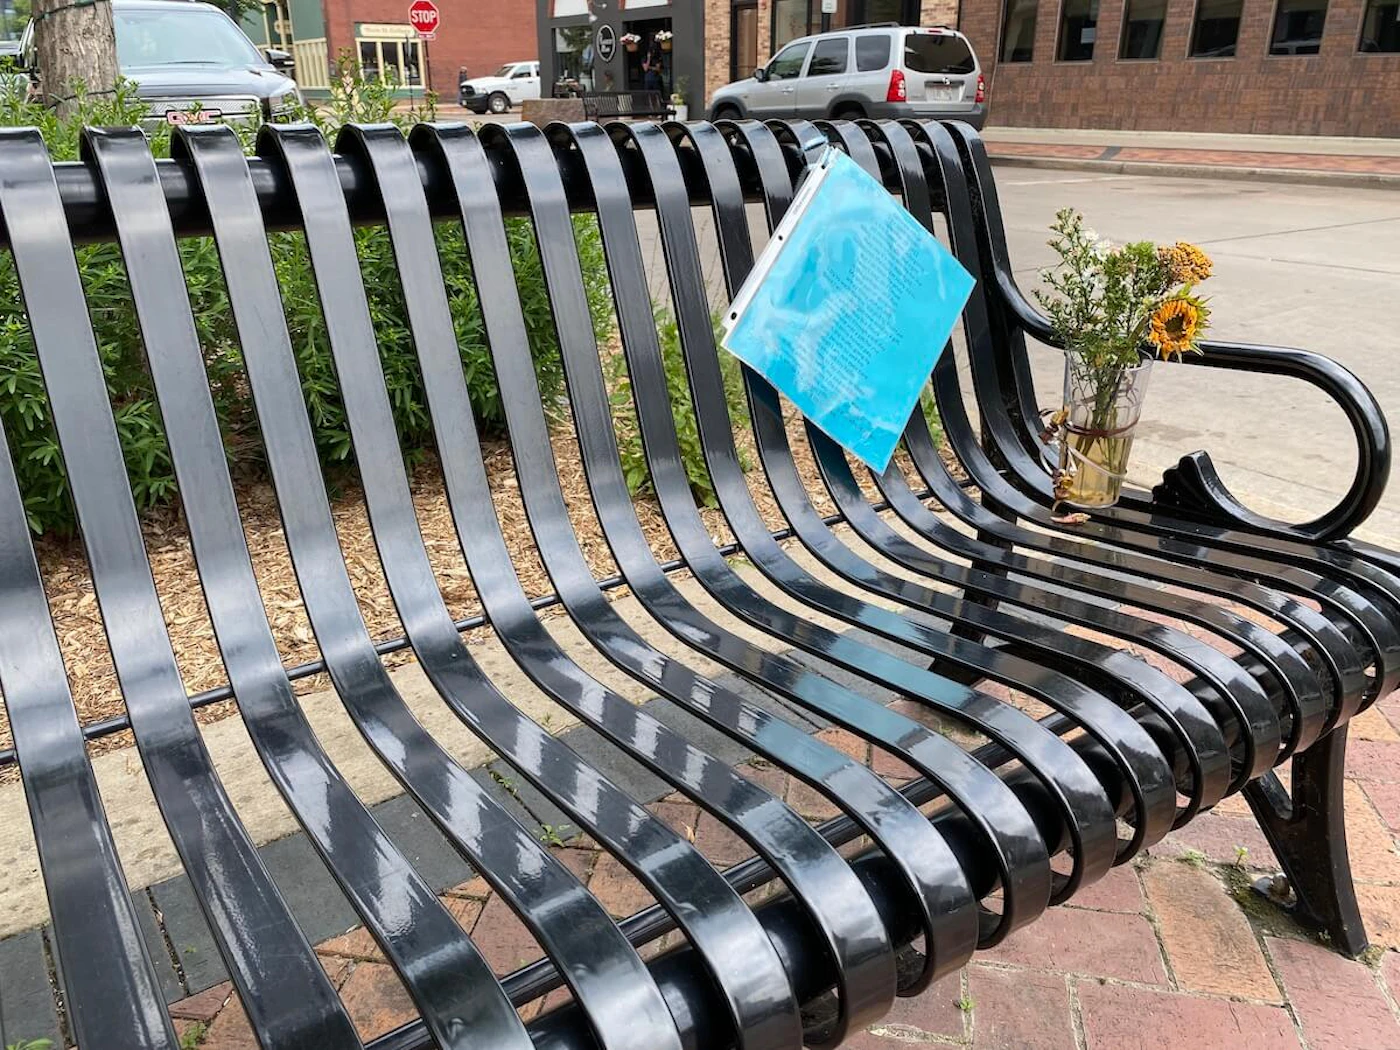 Flowers and a poem are left on a bench in memory of Marilyn Roeber, a homeless woman who often occupied the bench in downtown Eau Claire. Roeber, 66, was found dead on the bench last week. (Photo by Julian Emerson)